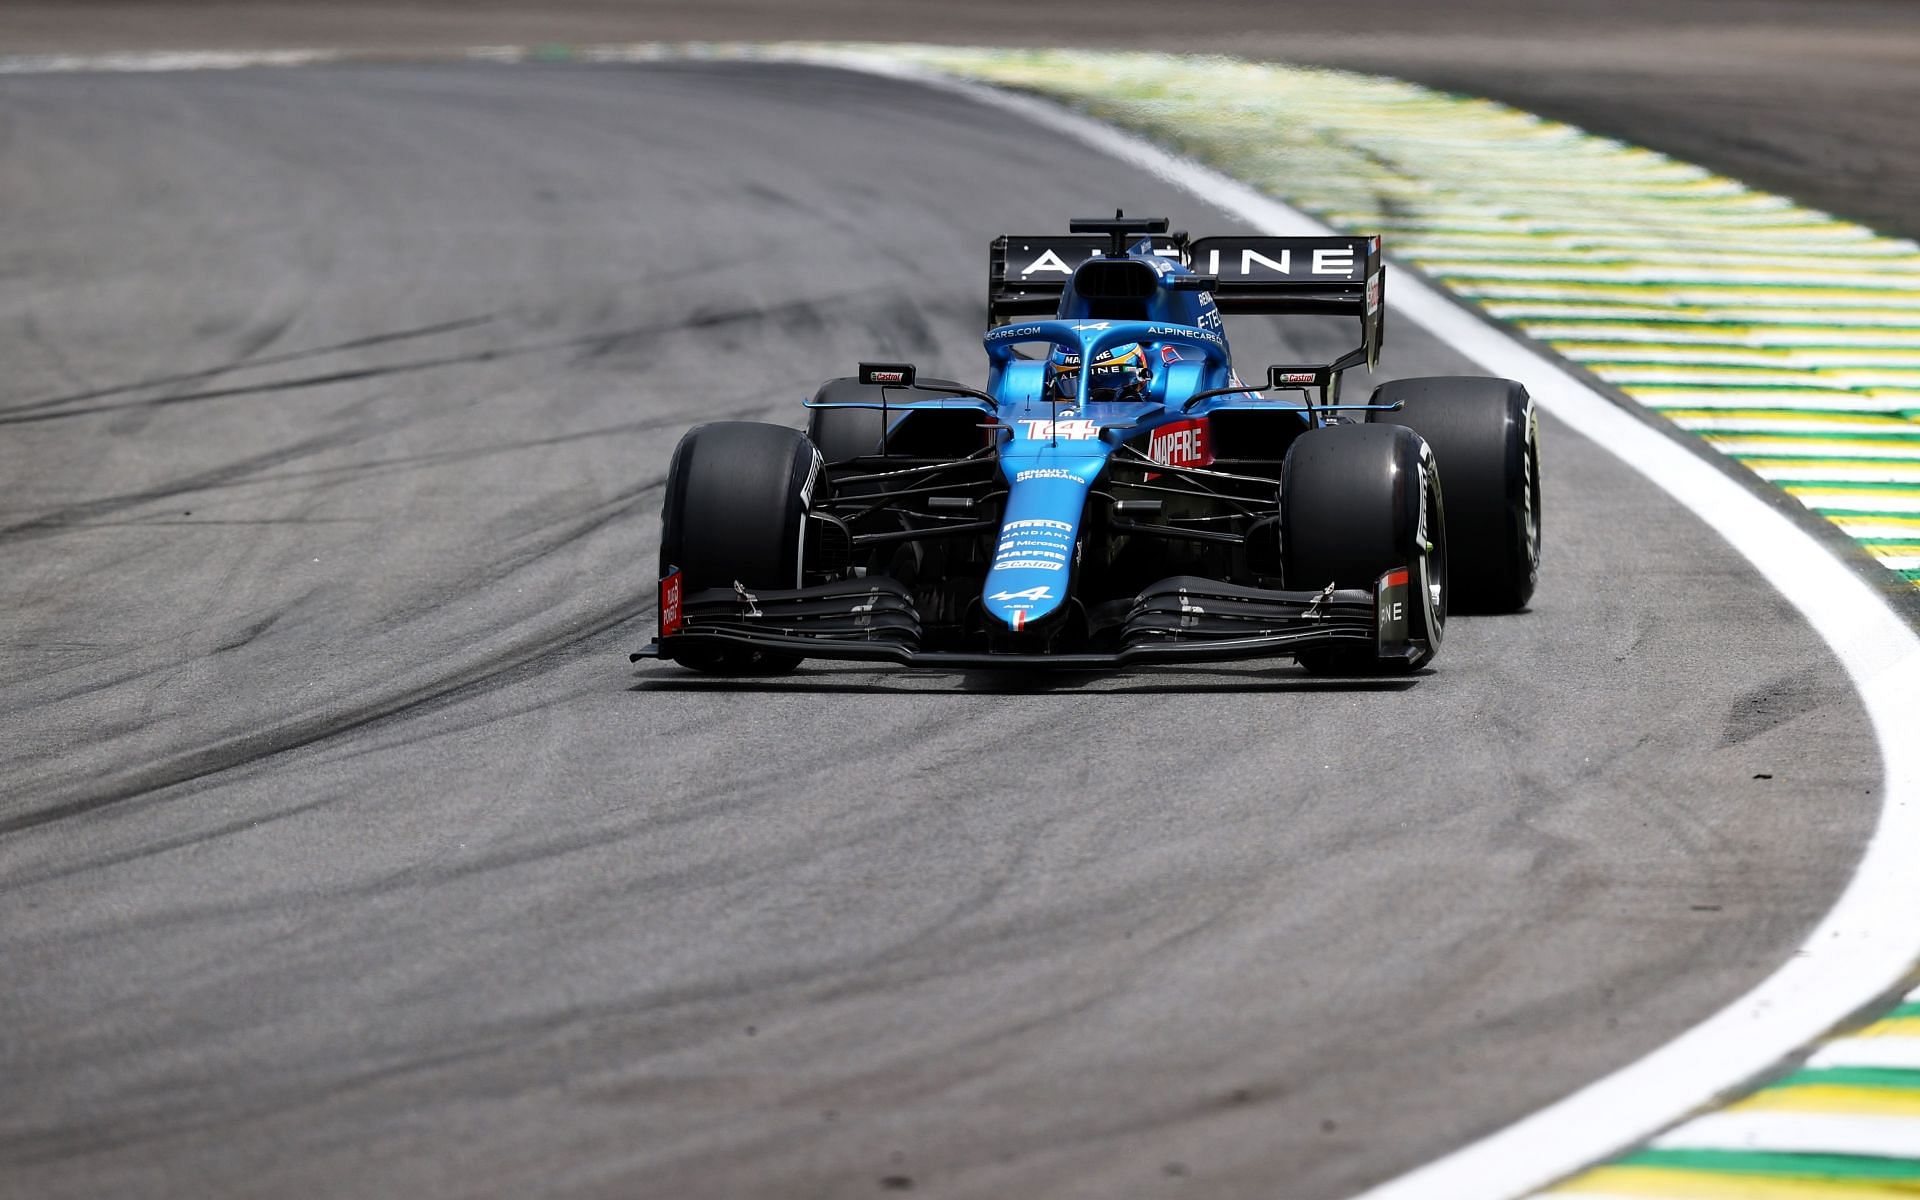 Fernando Alonso was the fastest in FP2 of the Brazil Grand Prix. (Photo by Buda Mendes/Getty Images)